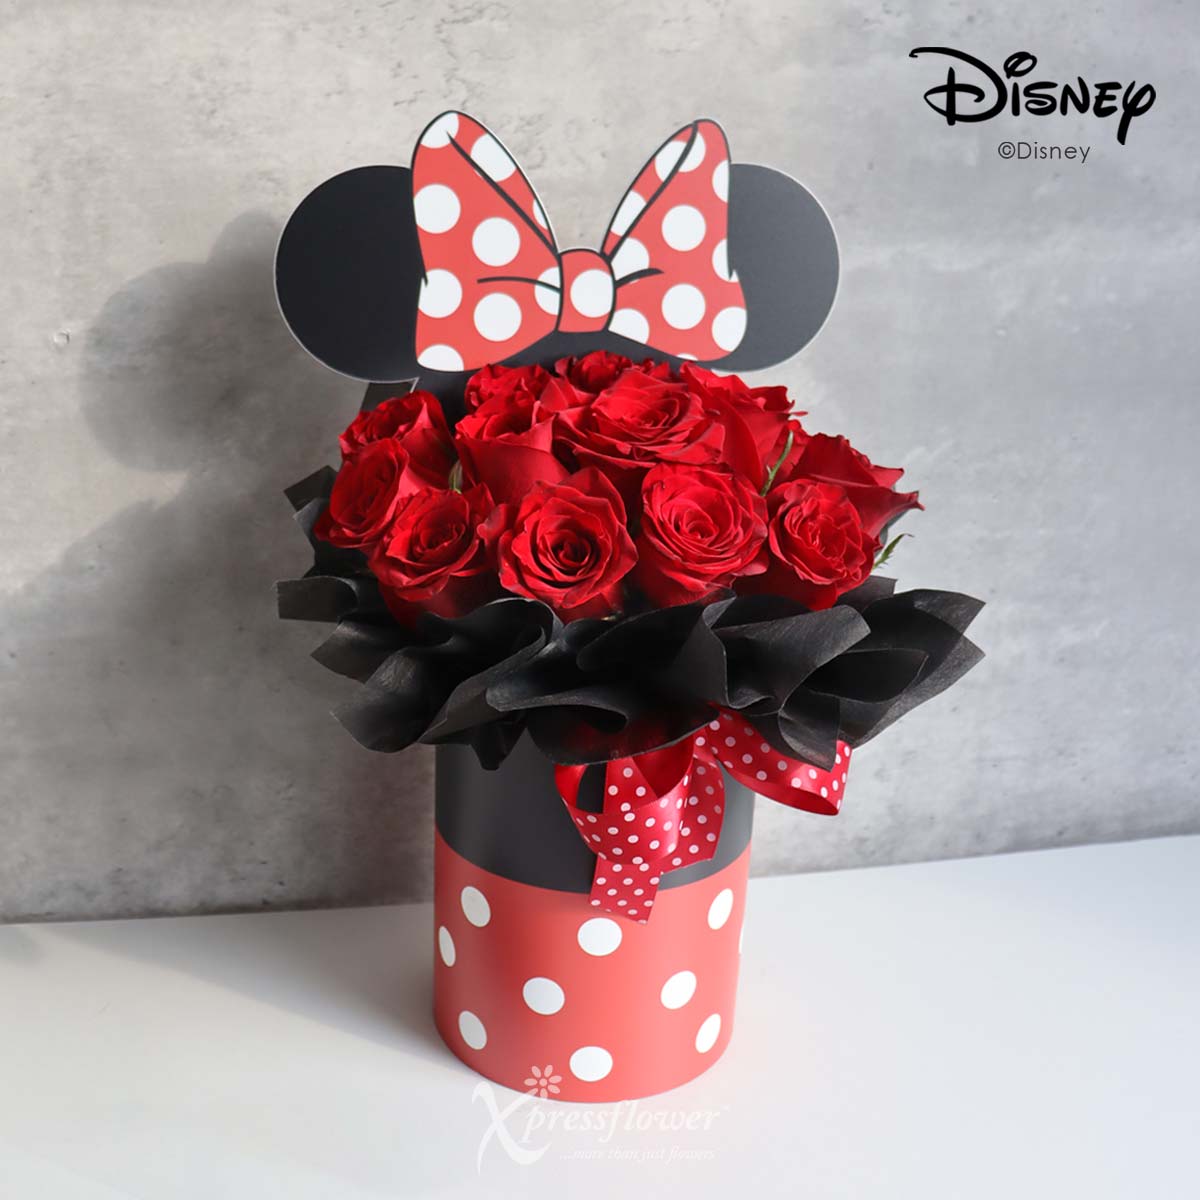 DSAR2305_Minnies Passion 18 Red Roses Disney Bloom Box 210923 3a